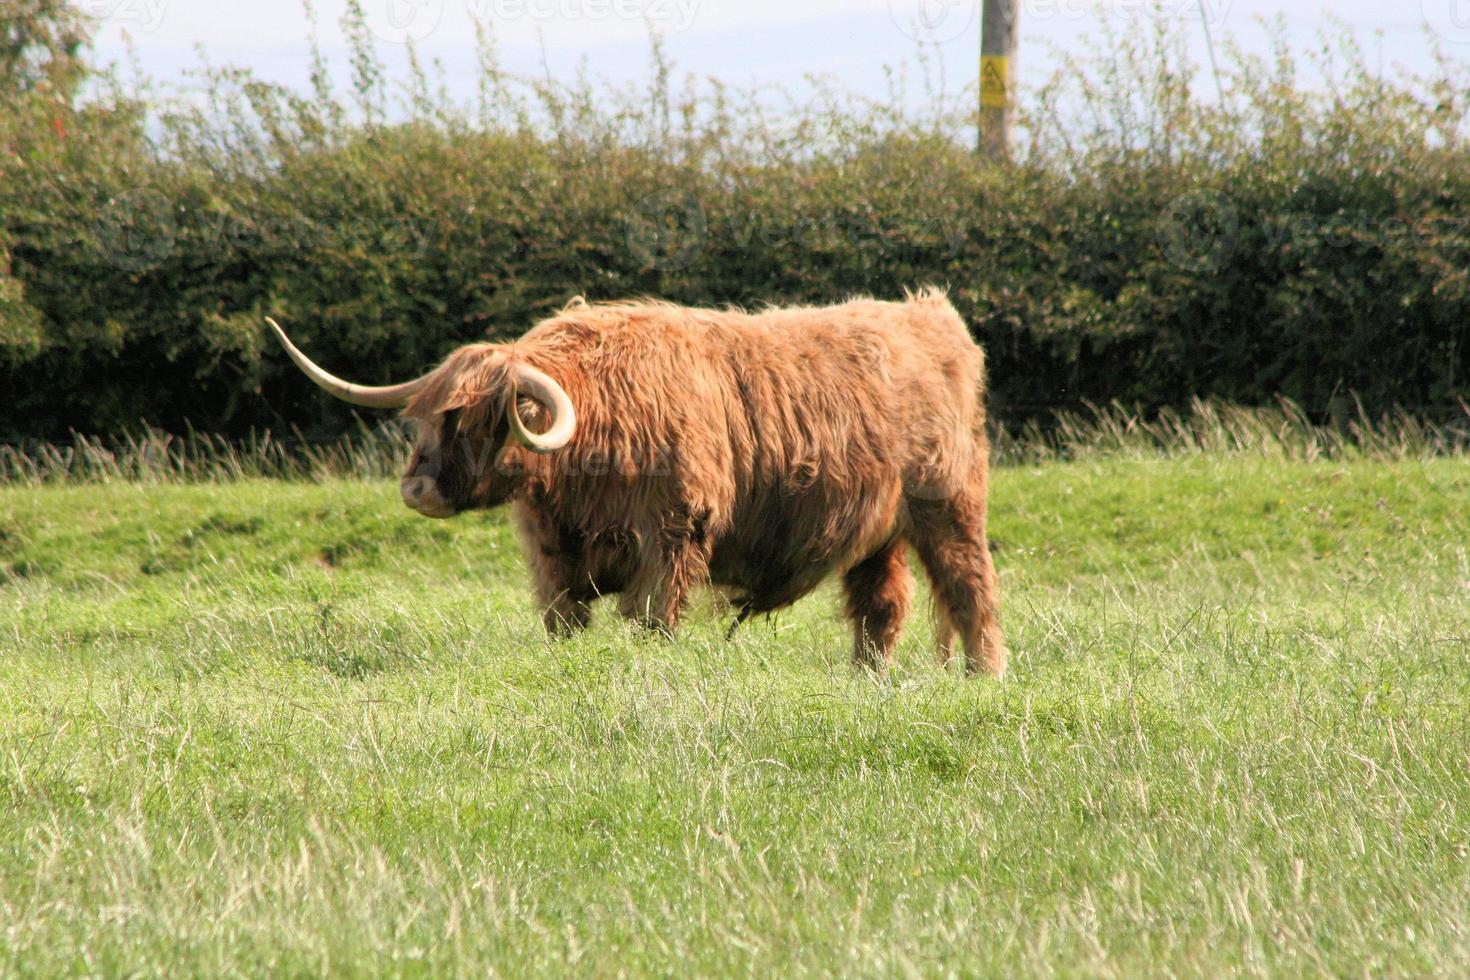 A view of a Highland Cow in Scotland photo